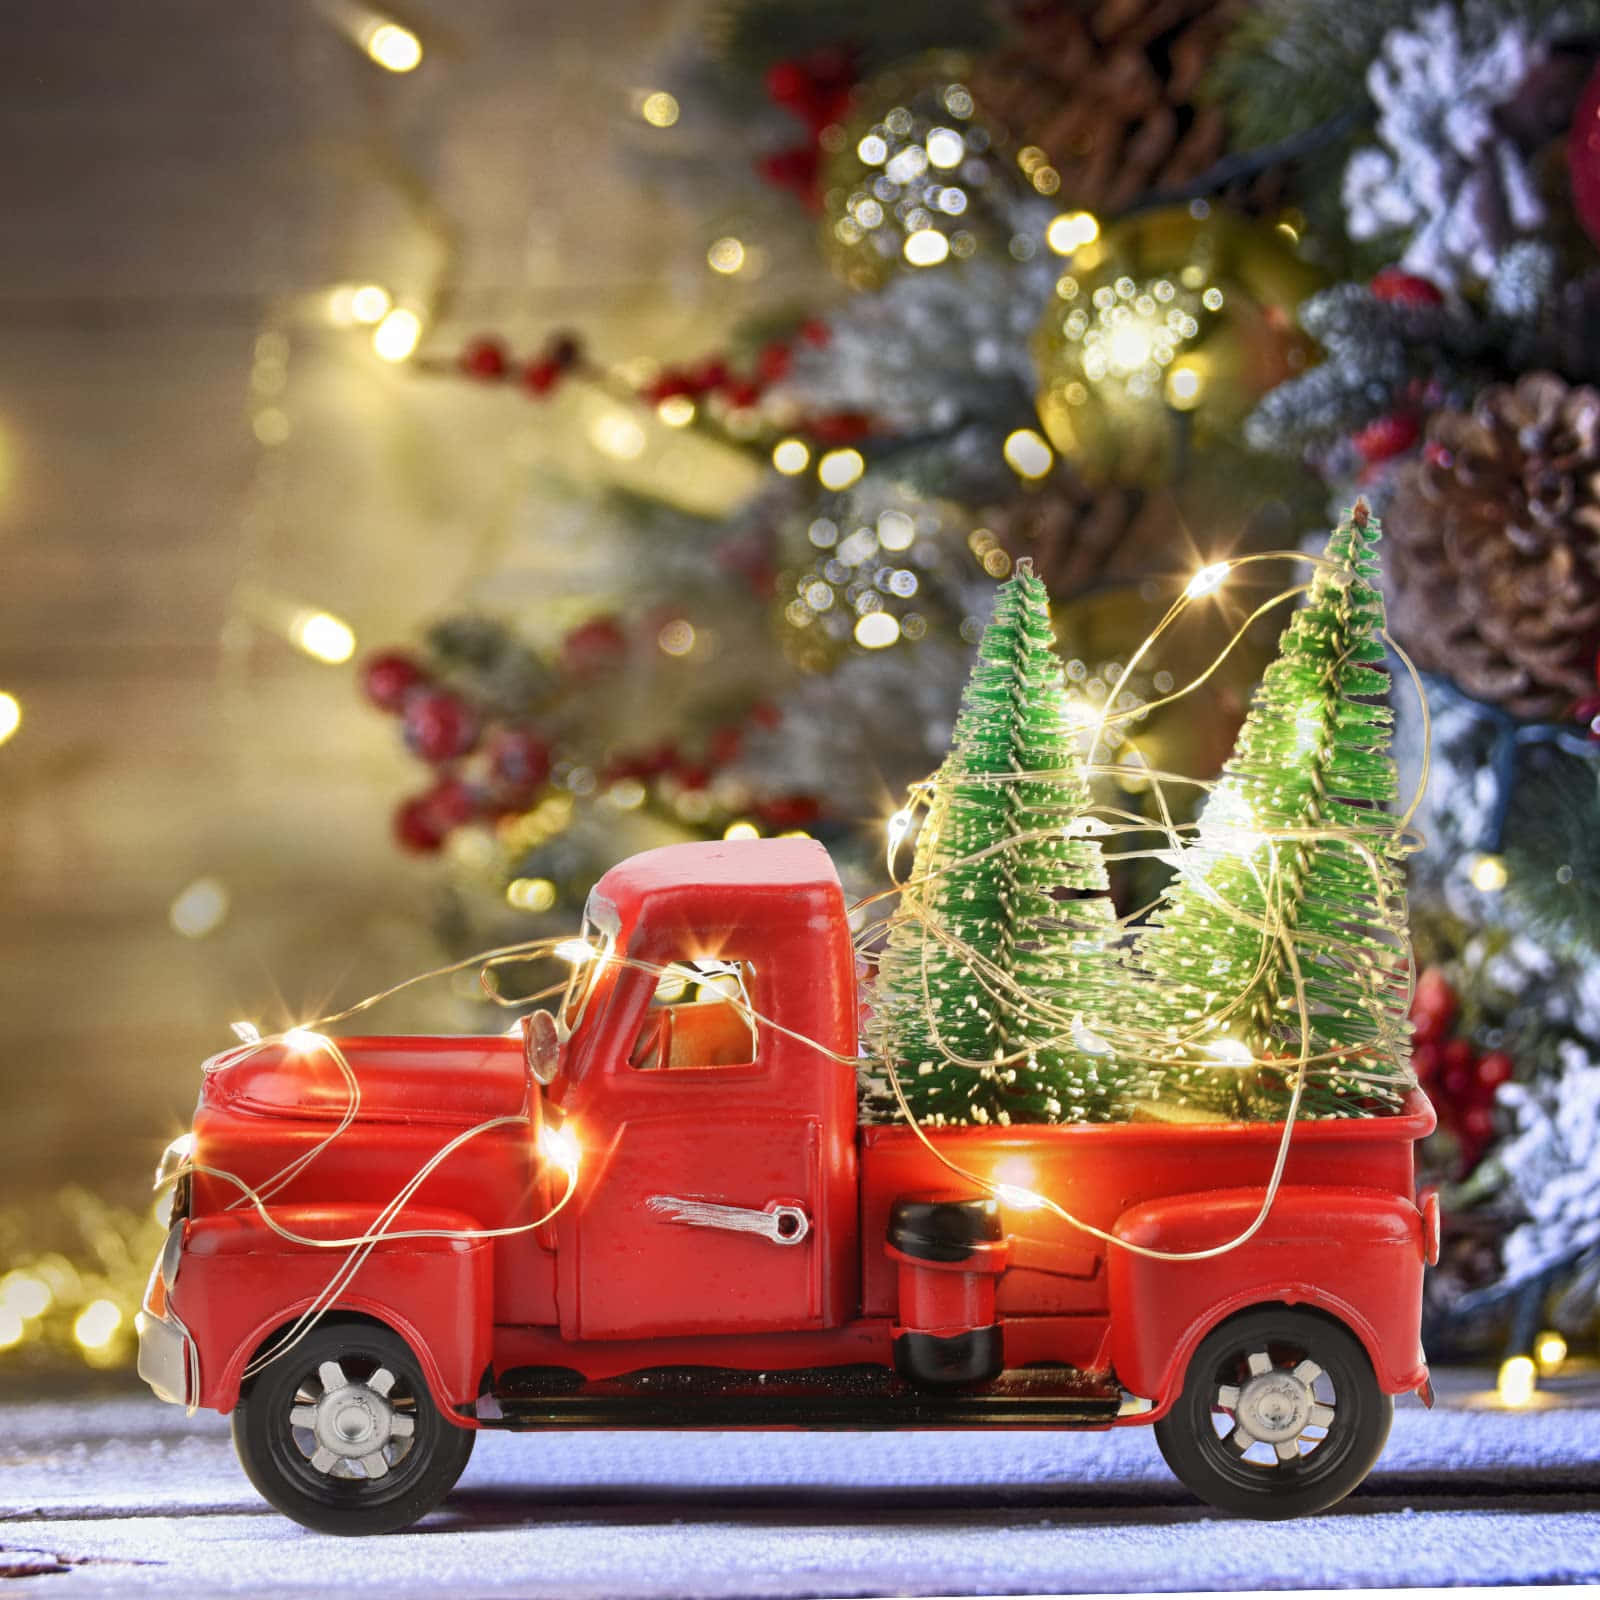 A nostalgic look back over the holidays with a bright, vintage truck. Wallpaper